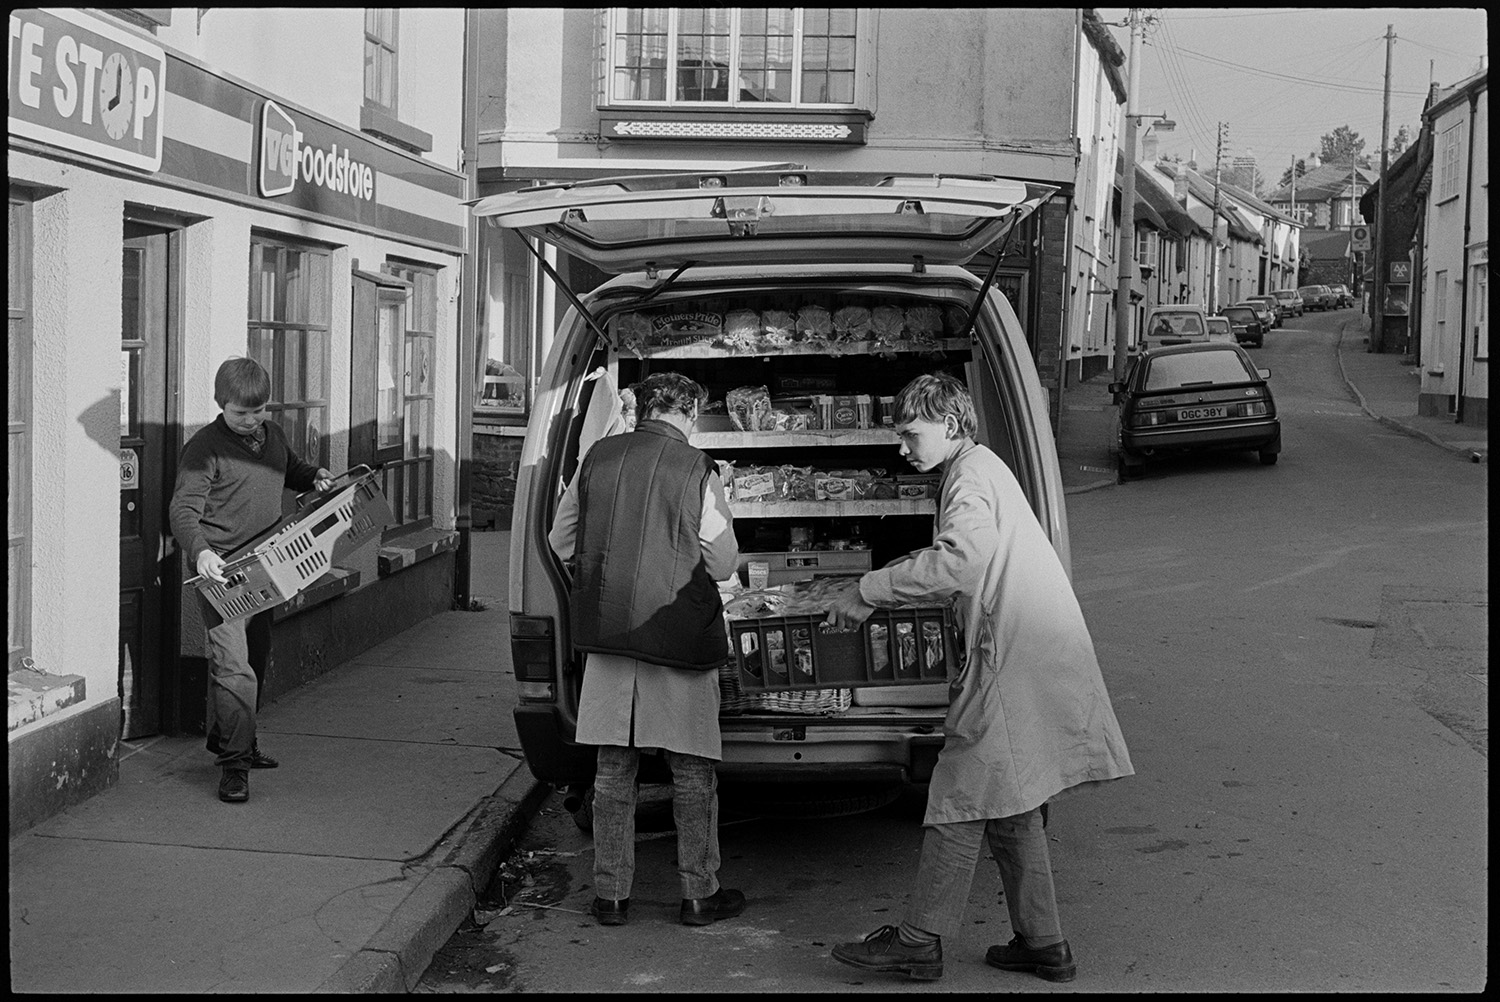 Baker making deliveries from van in morning.
[Street scene with people unloading baskets of bread from the back of an open van and carrying it in to the Late Stop shop in Chulmleigh.]